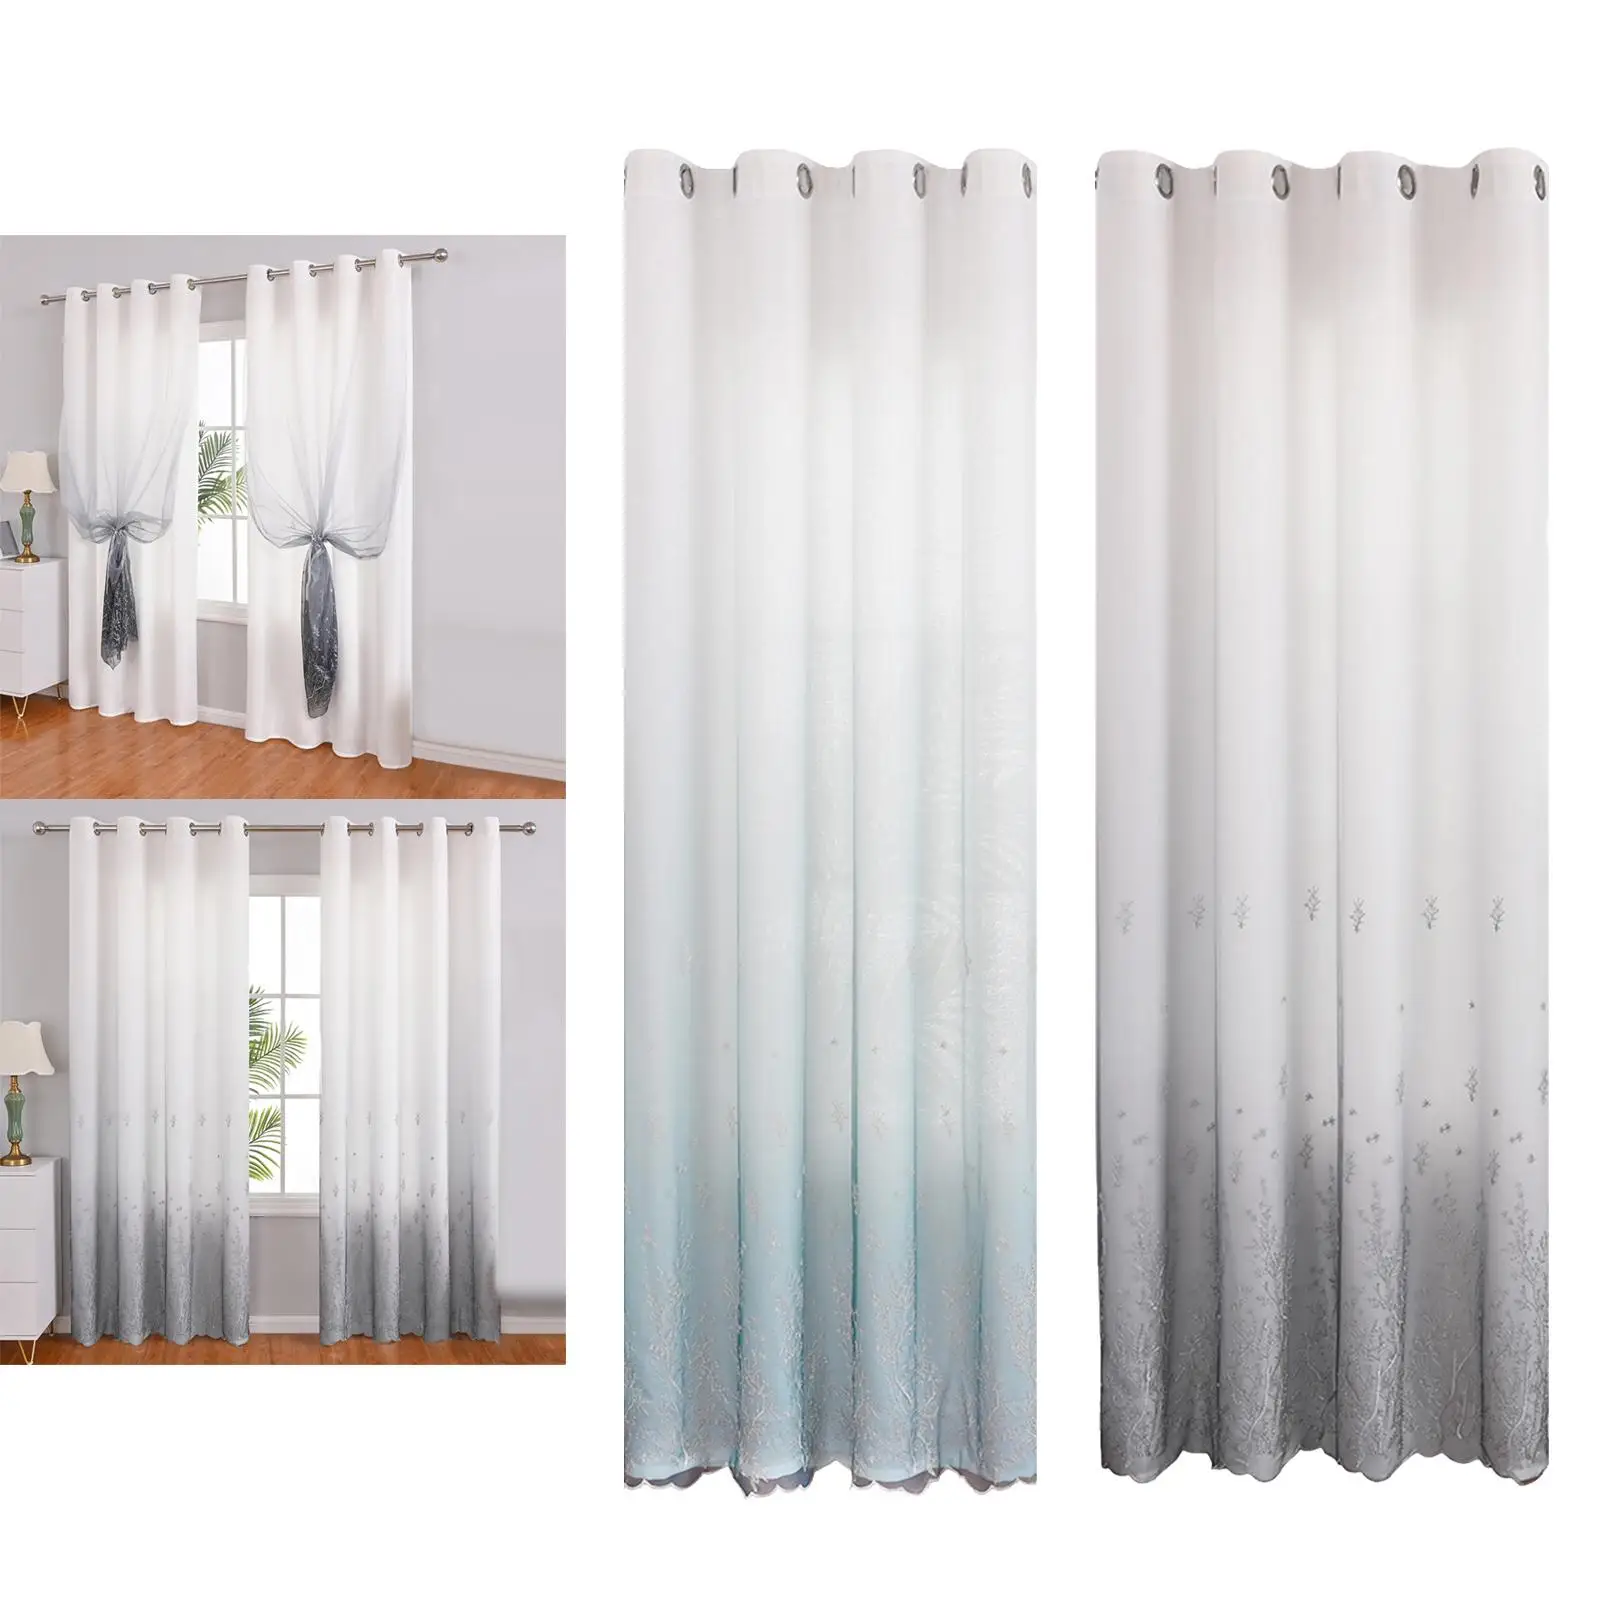 2Pcs Modern Blackout Curtains Window Draperies Darkening Noise Reduction Gauze Integrated Grommet Curtain for Bedroom Home